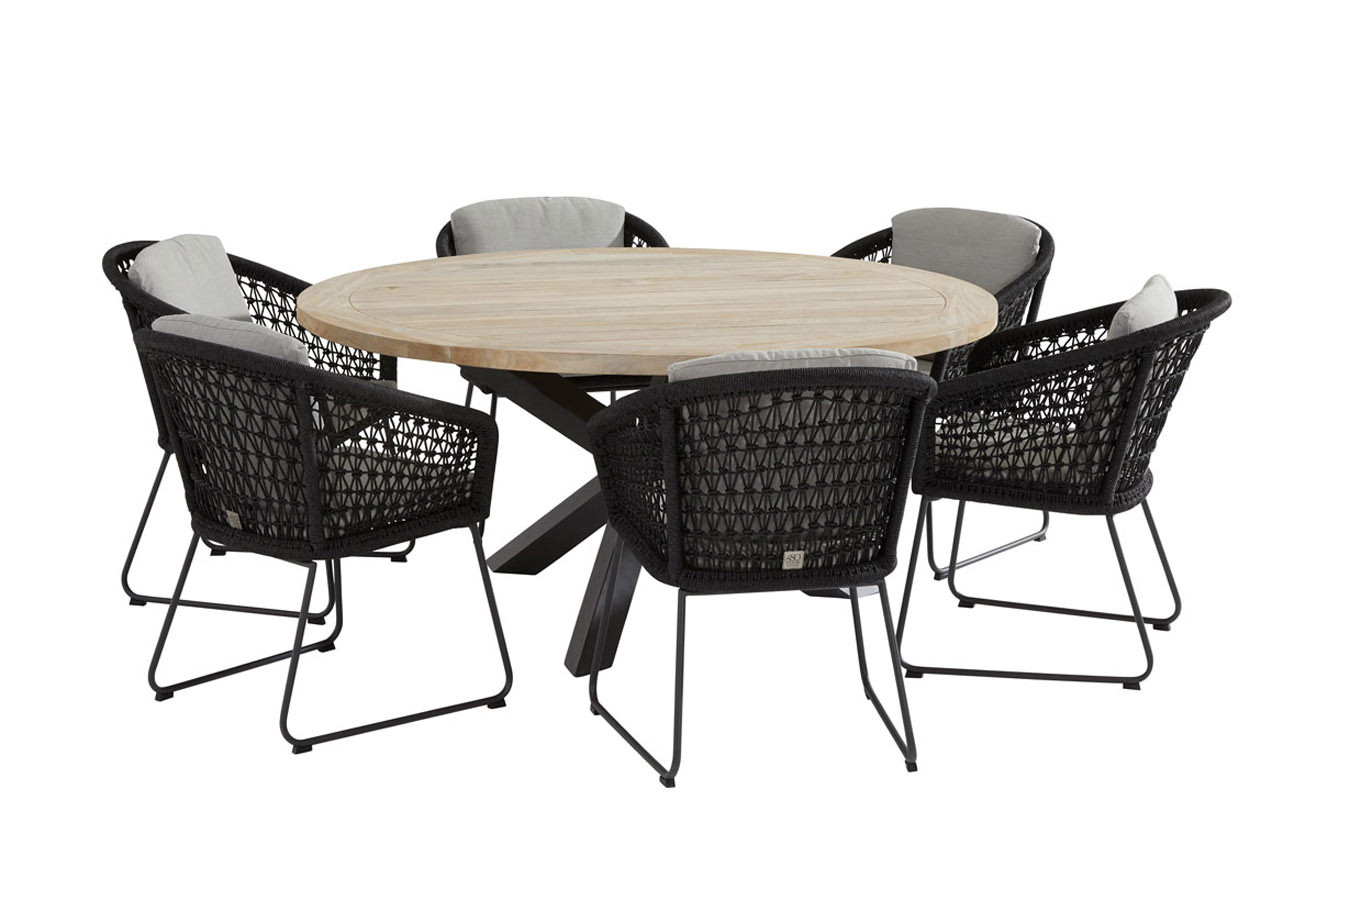 Mila dining set with Louvre table 160cm Alu legs